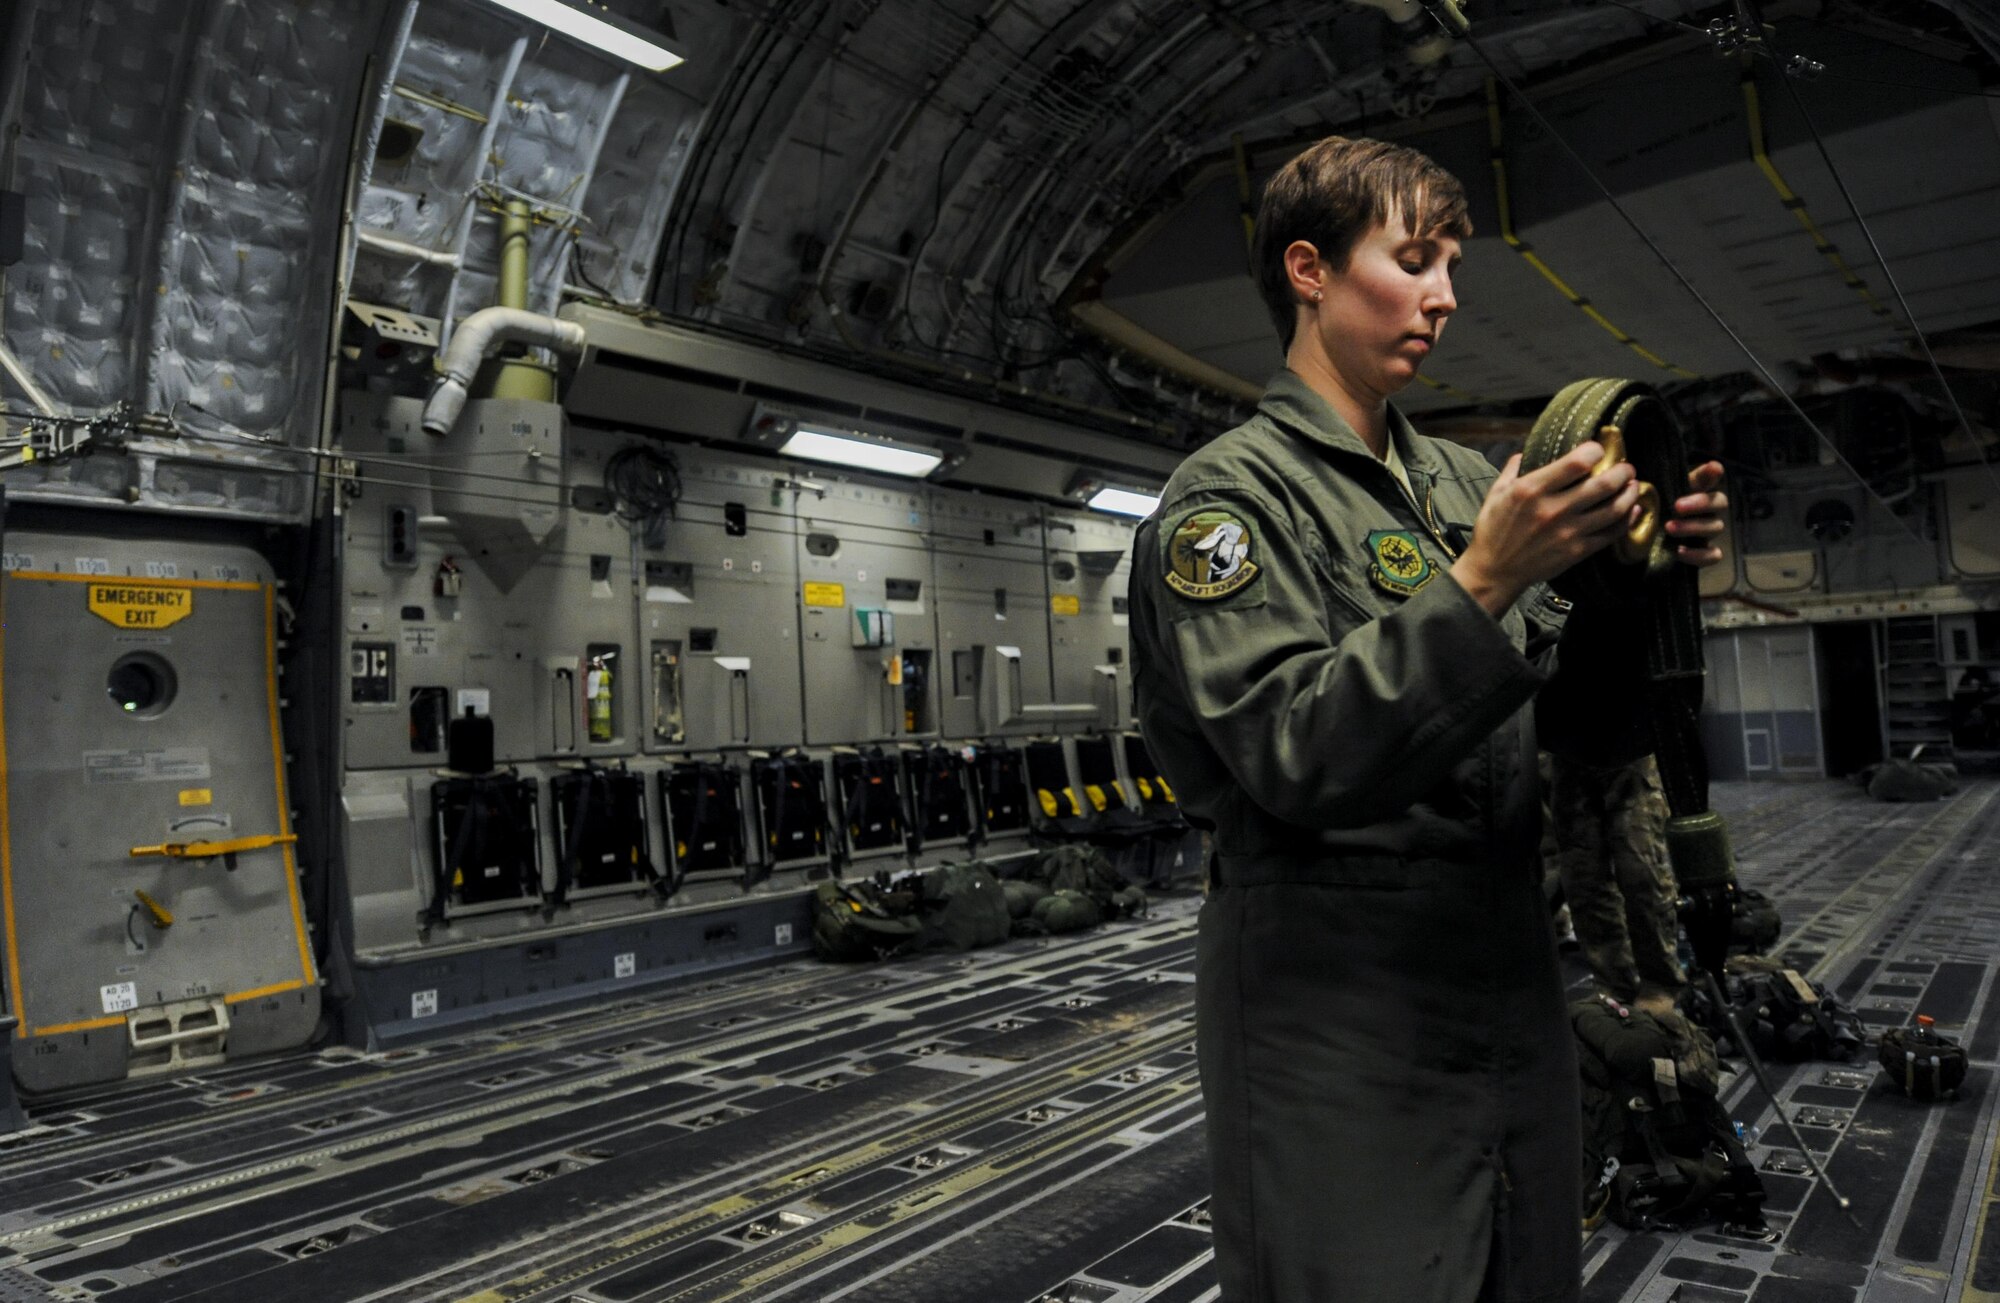 Senior Airman Ashley Igalo, 437th Airlift Wing, Joint Base Charleston, S.C., loadmaster, prepares the interior of a C-17 for Survival Evasion Resistance Escape specialist’s static line jumps during Red Flag 16-3 at Nellis Air Force Base, Nev., July 20, 2016. All four branches of the U.S. Military participate in the Red Flag training conducted on the vast bombing and gunnery ranges of the Nevada Test and Training Range. (U.S. Air Force photo by Airman 1st Class Kevin Tanenbaum/Released)